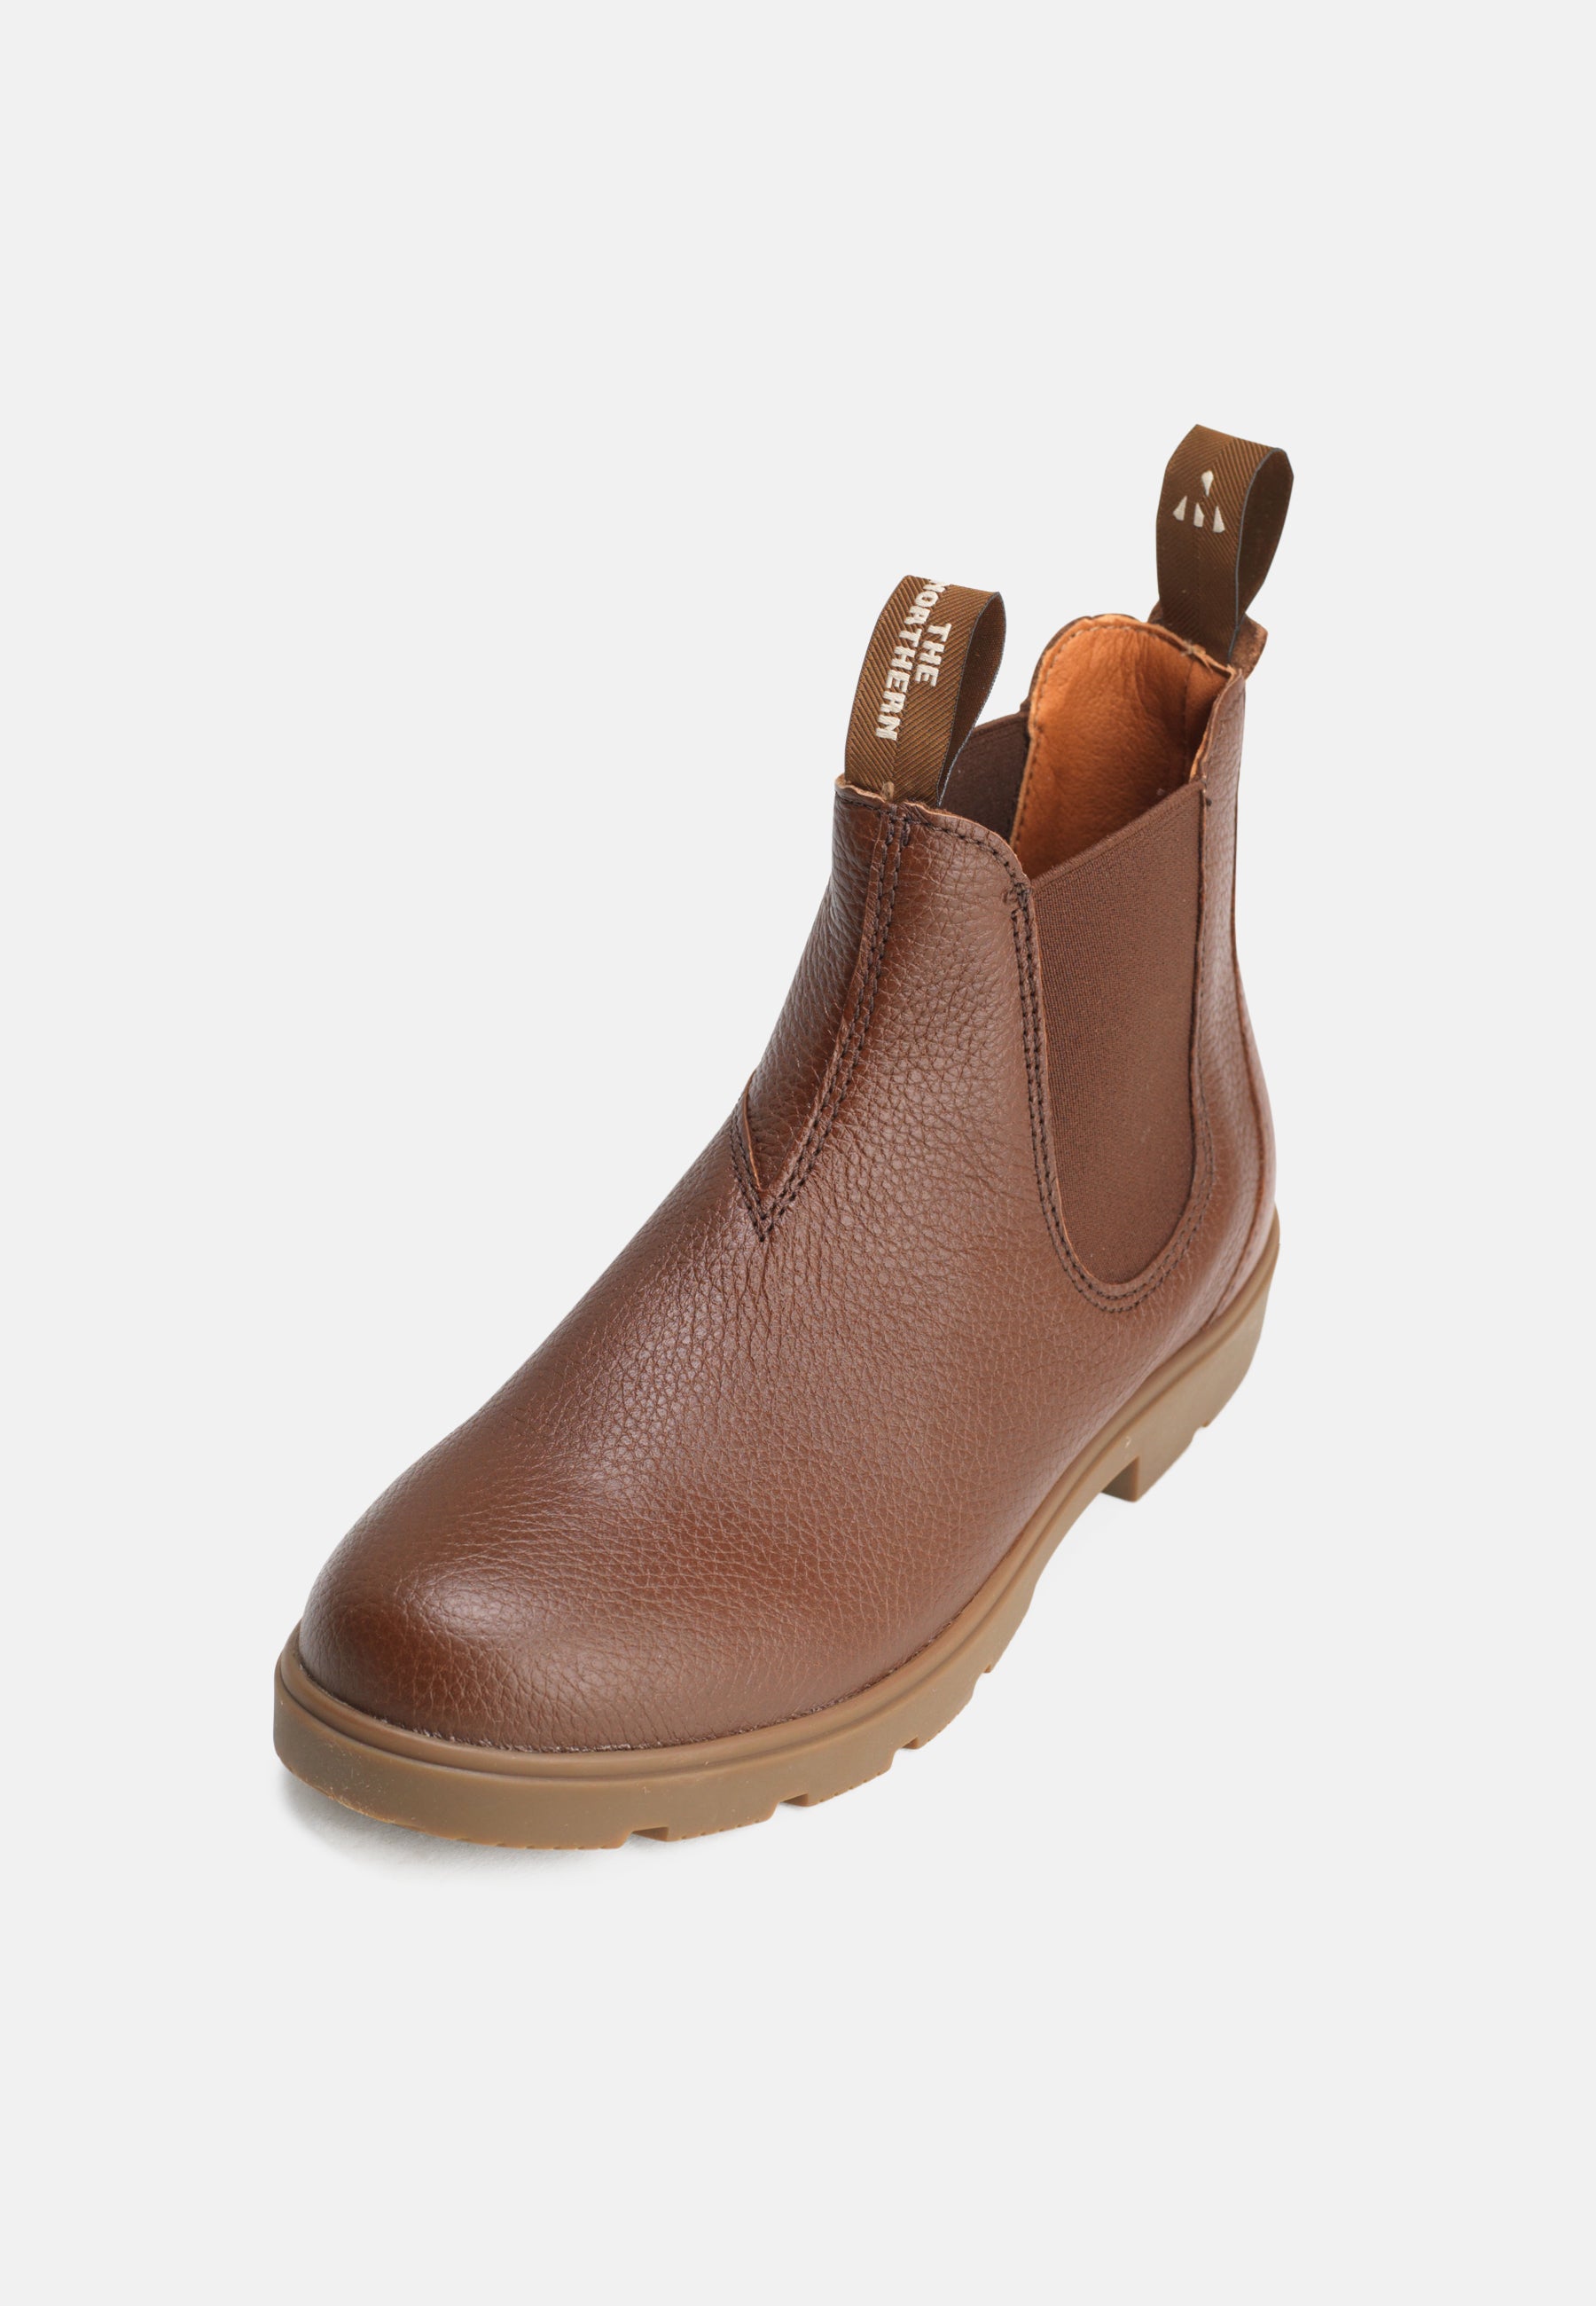 The Northern Gorm Støvle Elk Pull Up Leather Boot 144 Mahogany